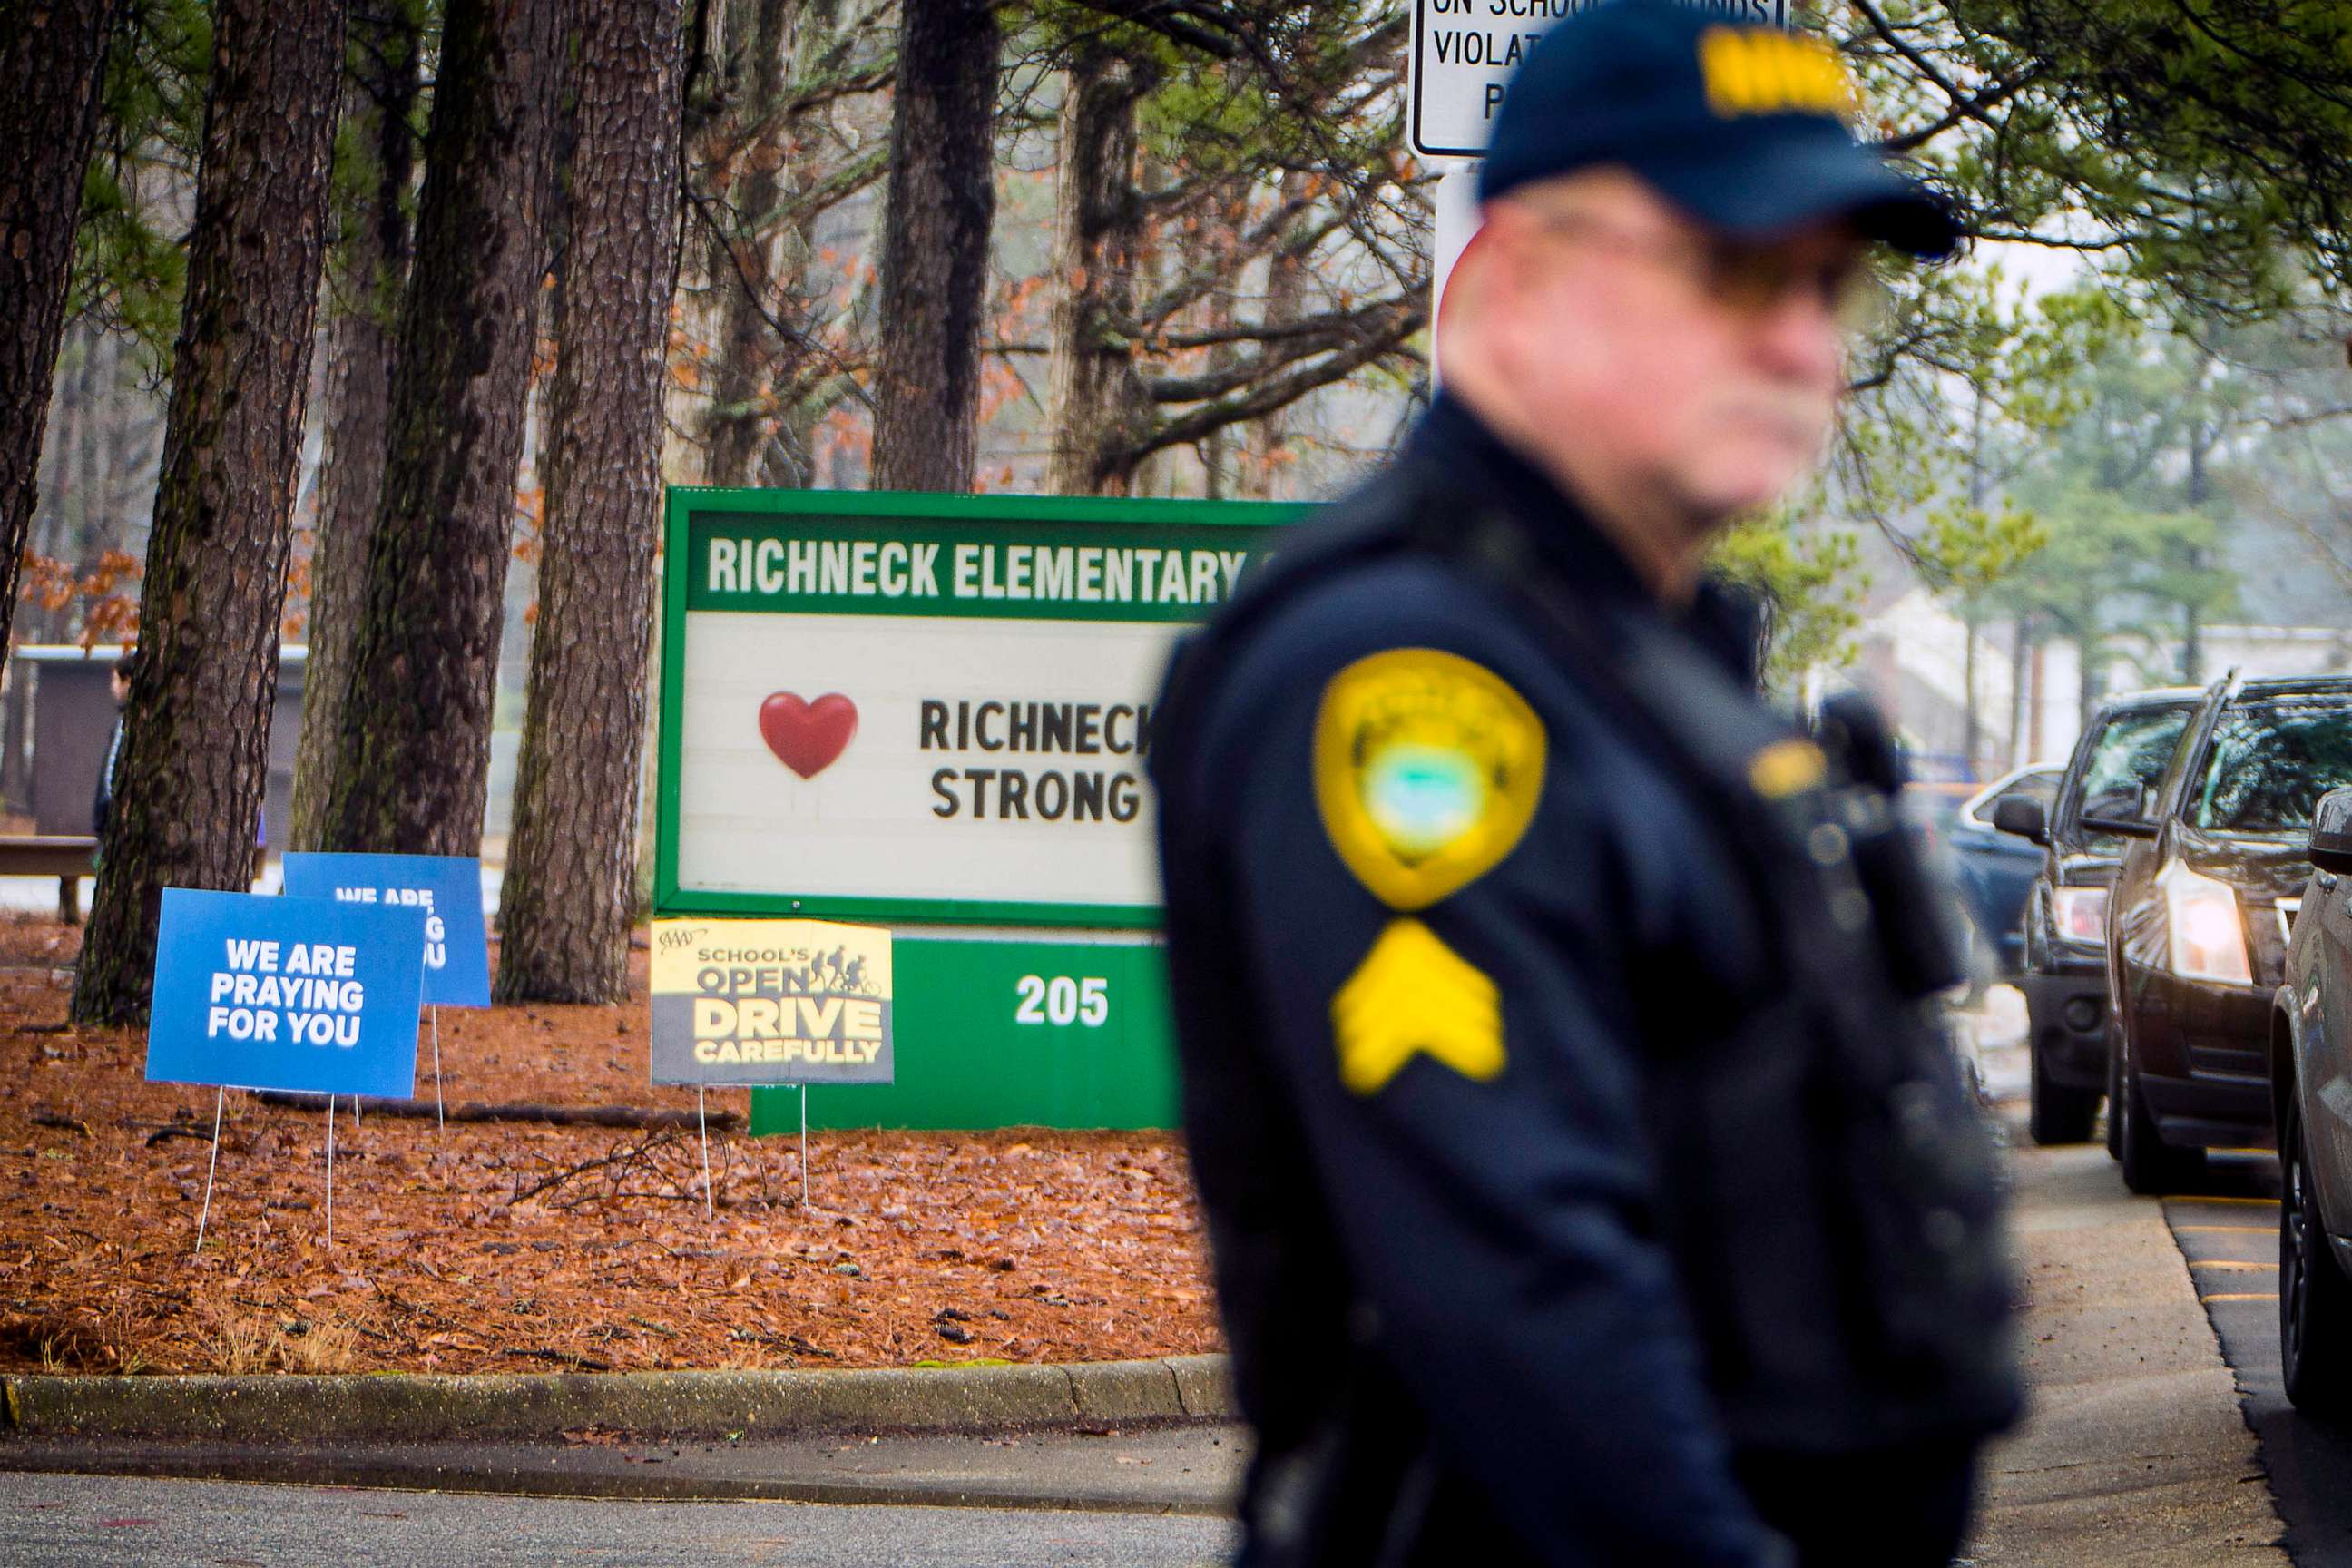 PHOTO: A Newport News police officer directs traffic at Richneck Elementary School in Newport News, Va., Jan. 30, 2023.